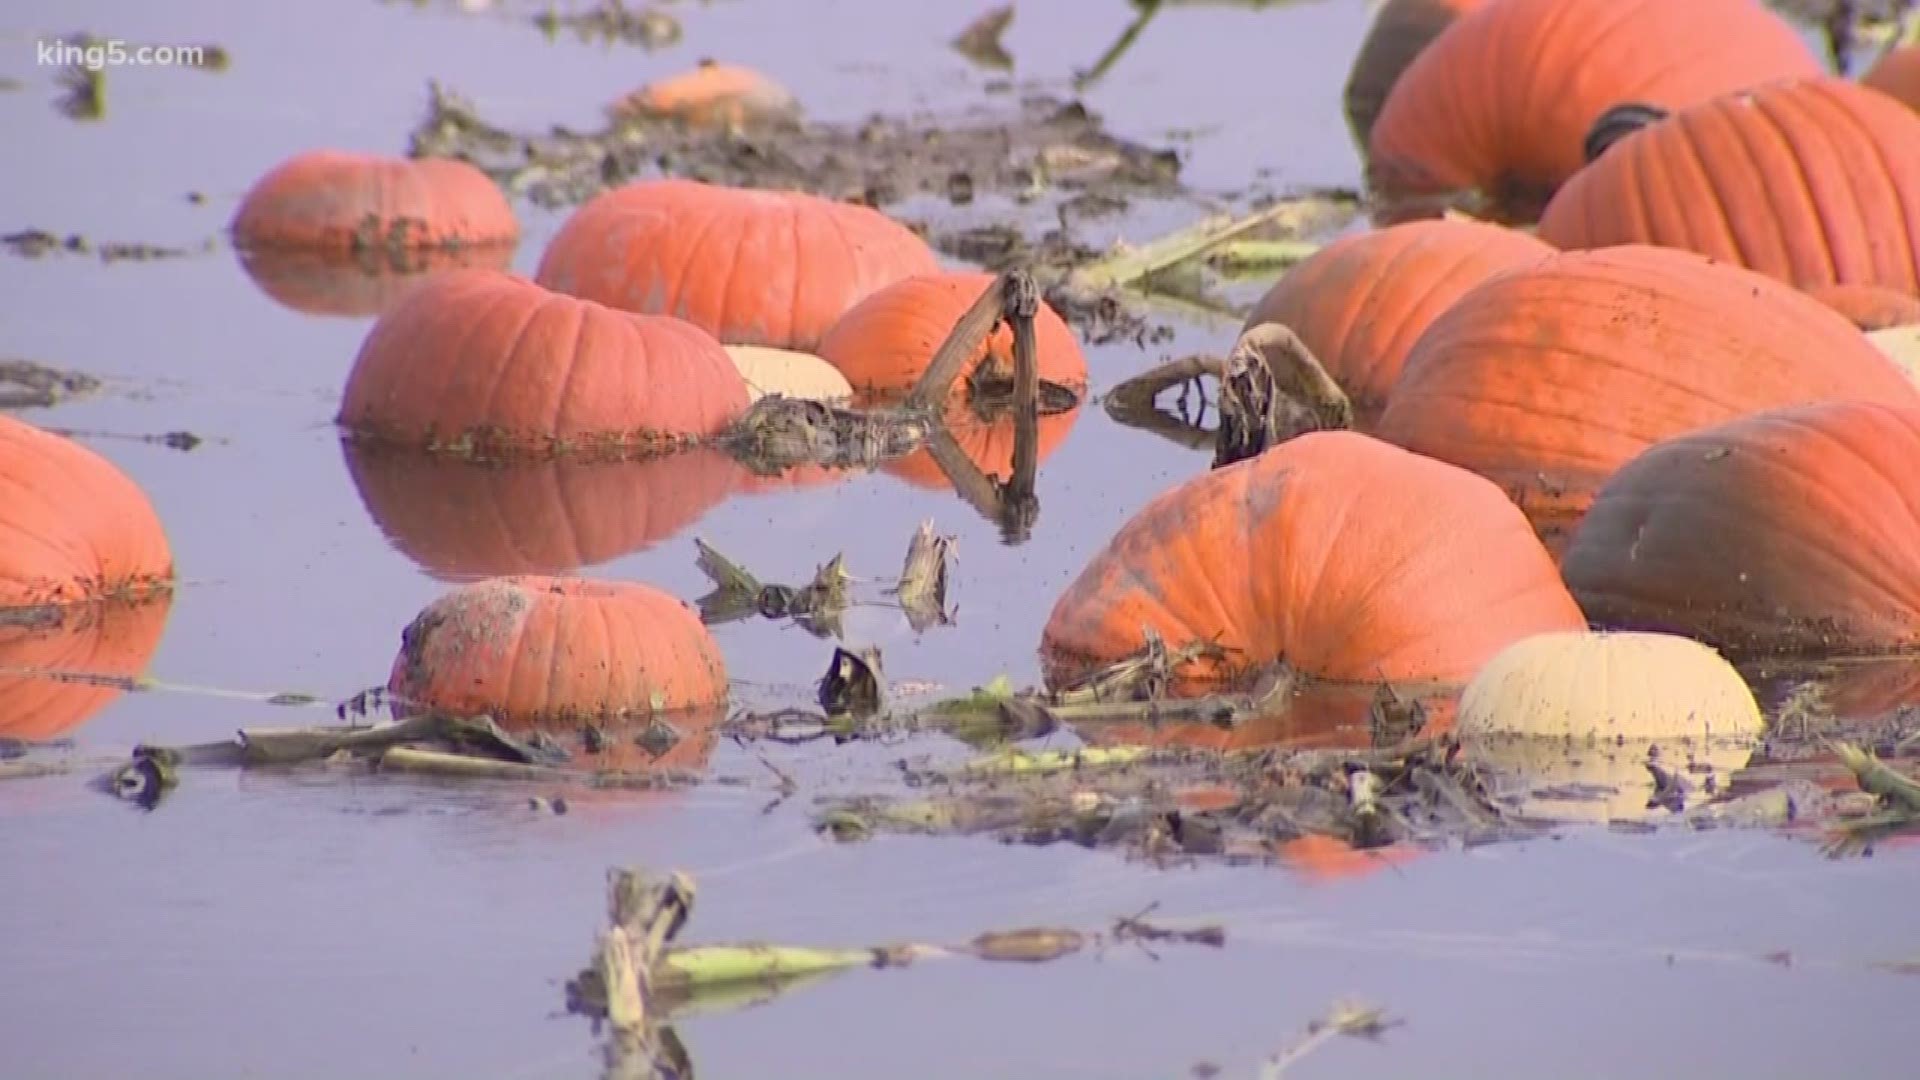 Many farms in the Snoqualmie Valley are in recovery mode following this week’s flooding. Pumpkin farmers are scrambling as Halloween is just one week away.